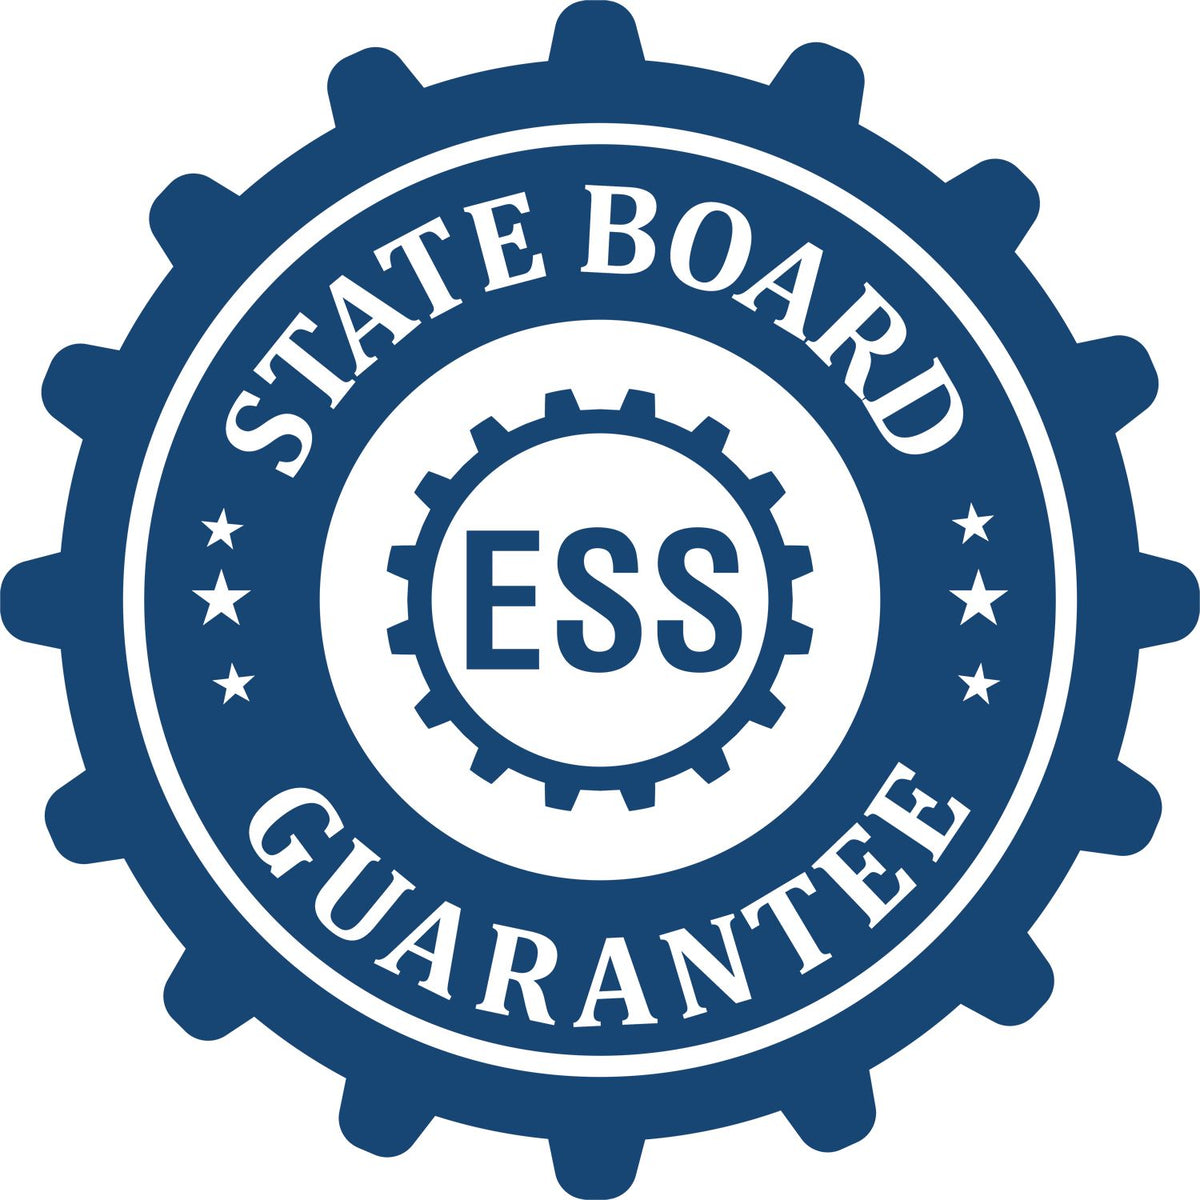 An emblem in a gear shape illustrating a state board guarantee for the Heavy-Duty Minnesota Rectangular Notary Stamp product.